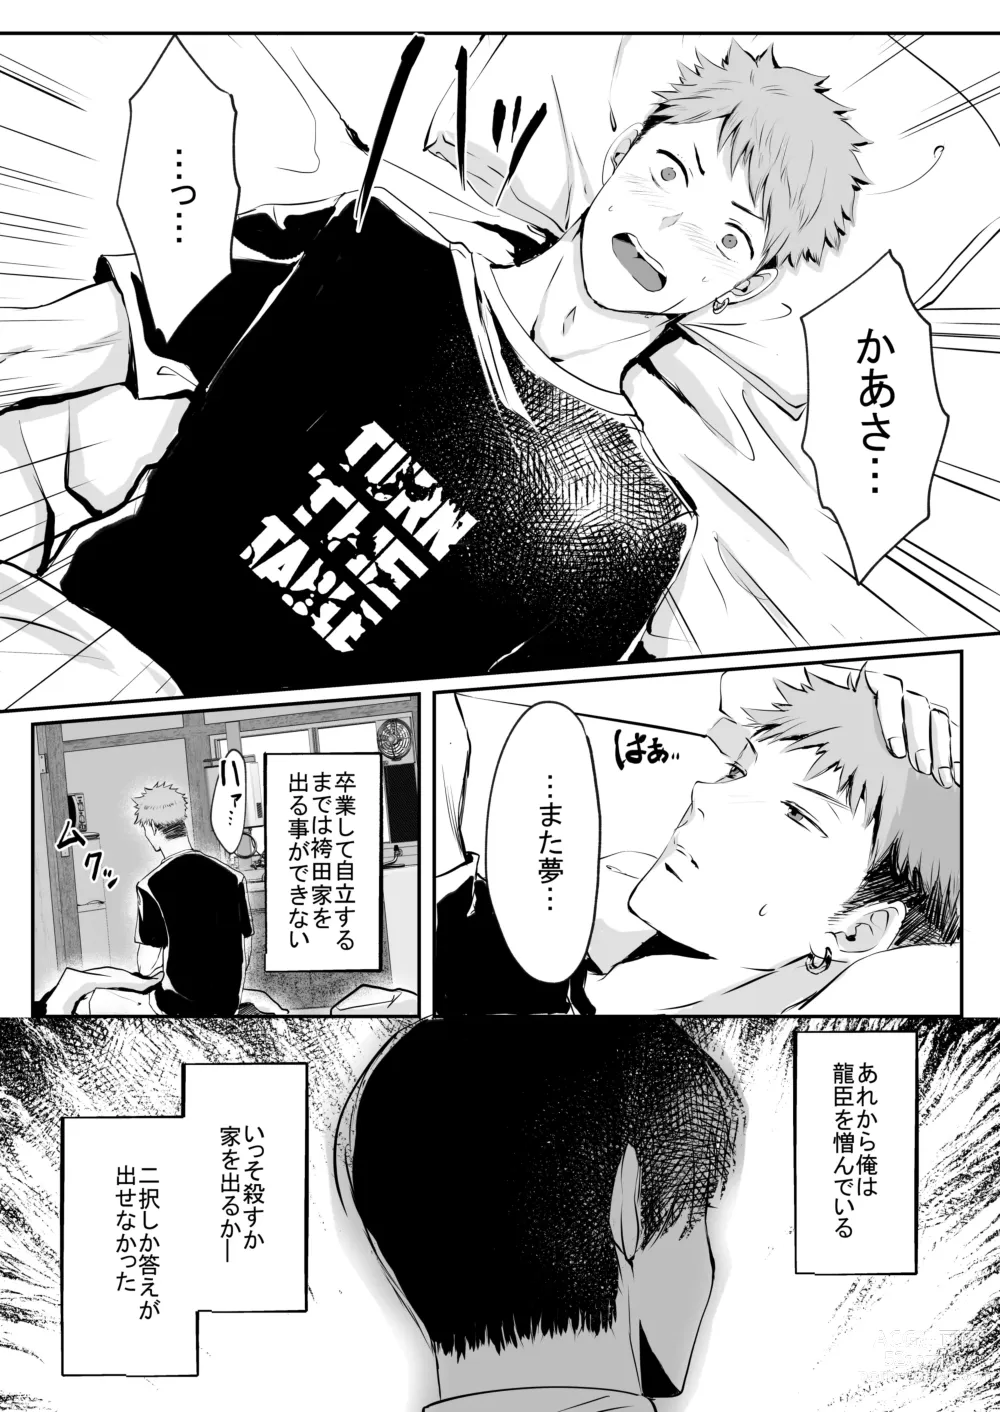 Page 12 of doujinshi Im crazy for you.